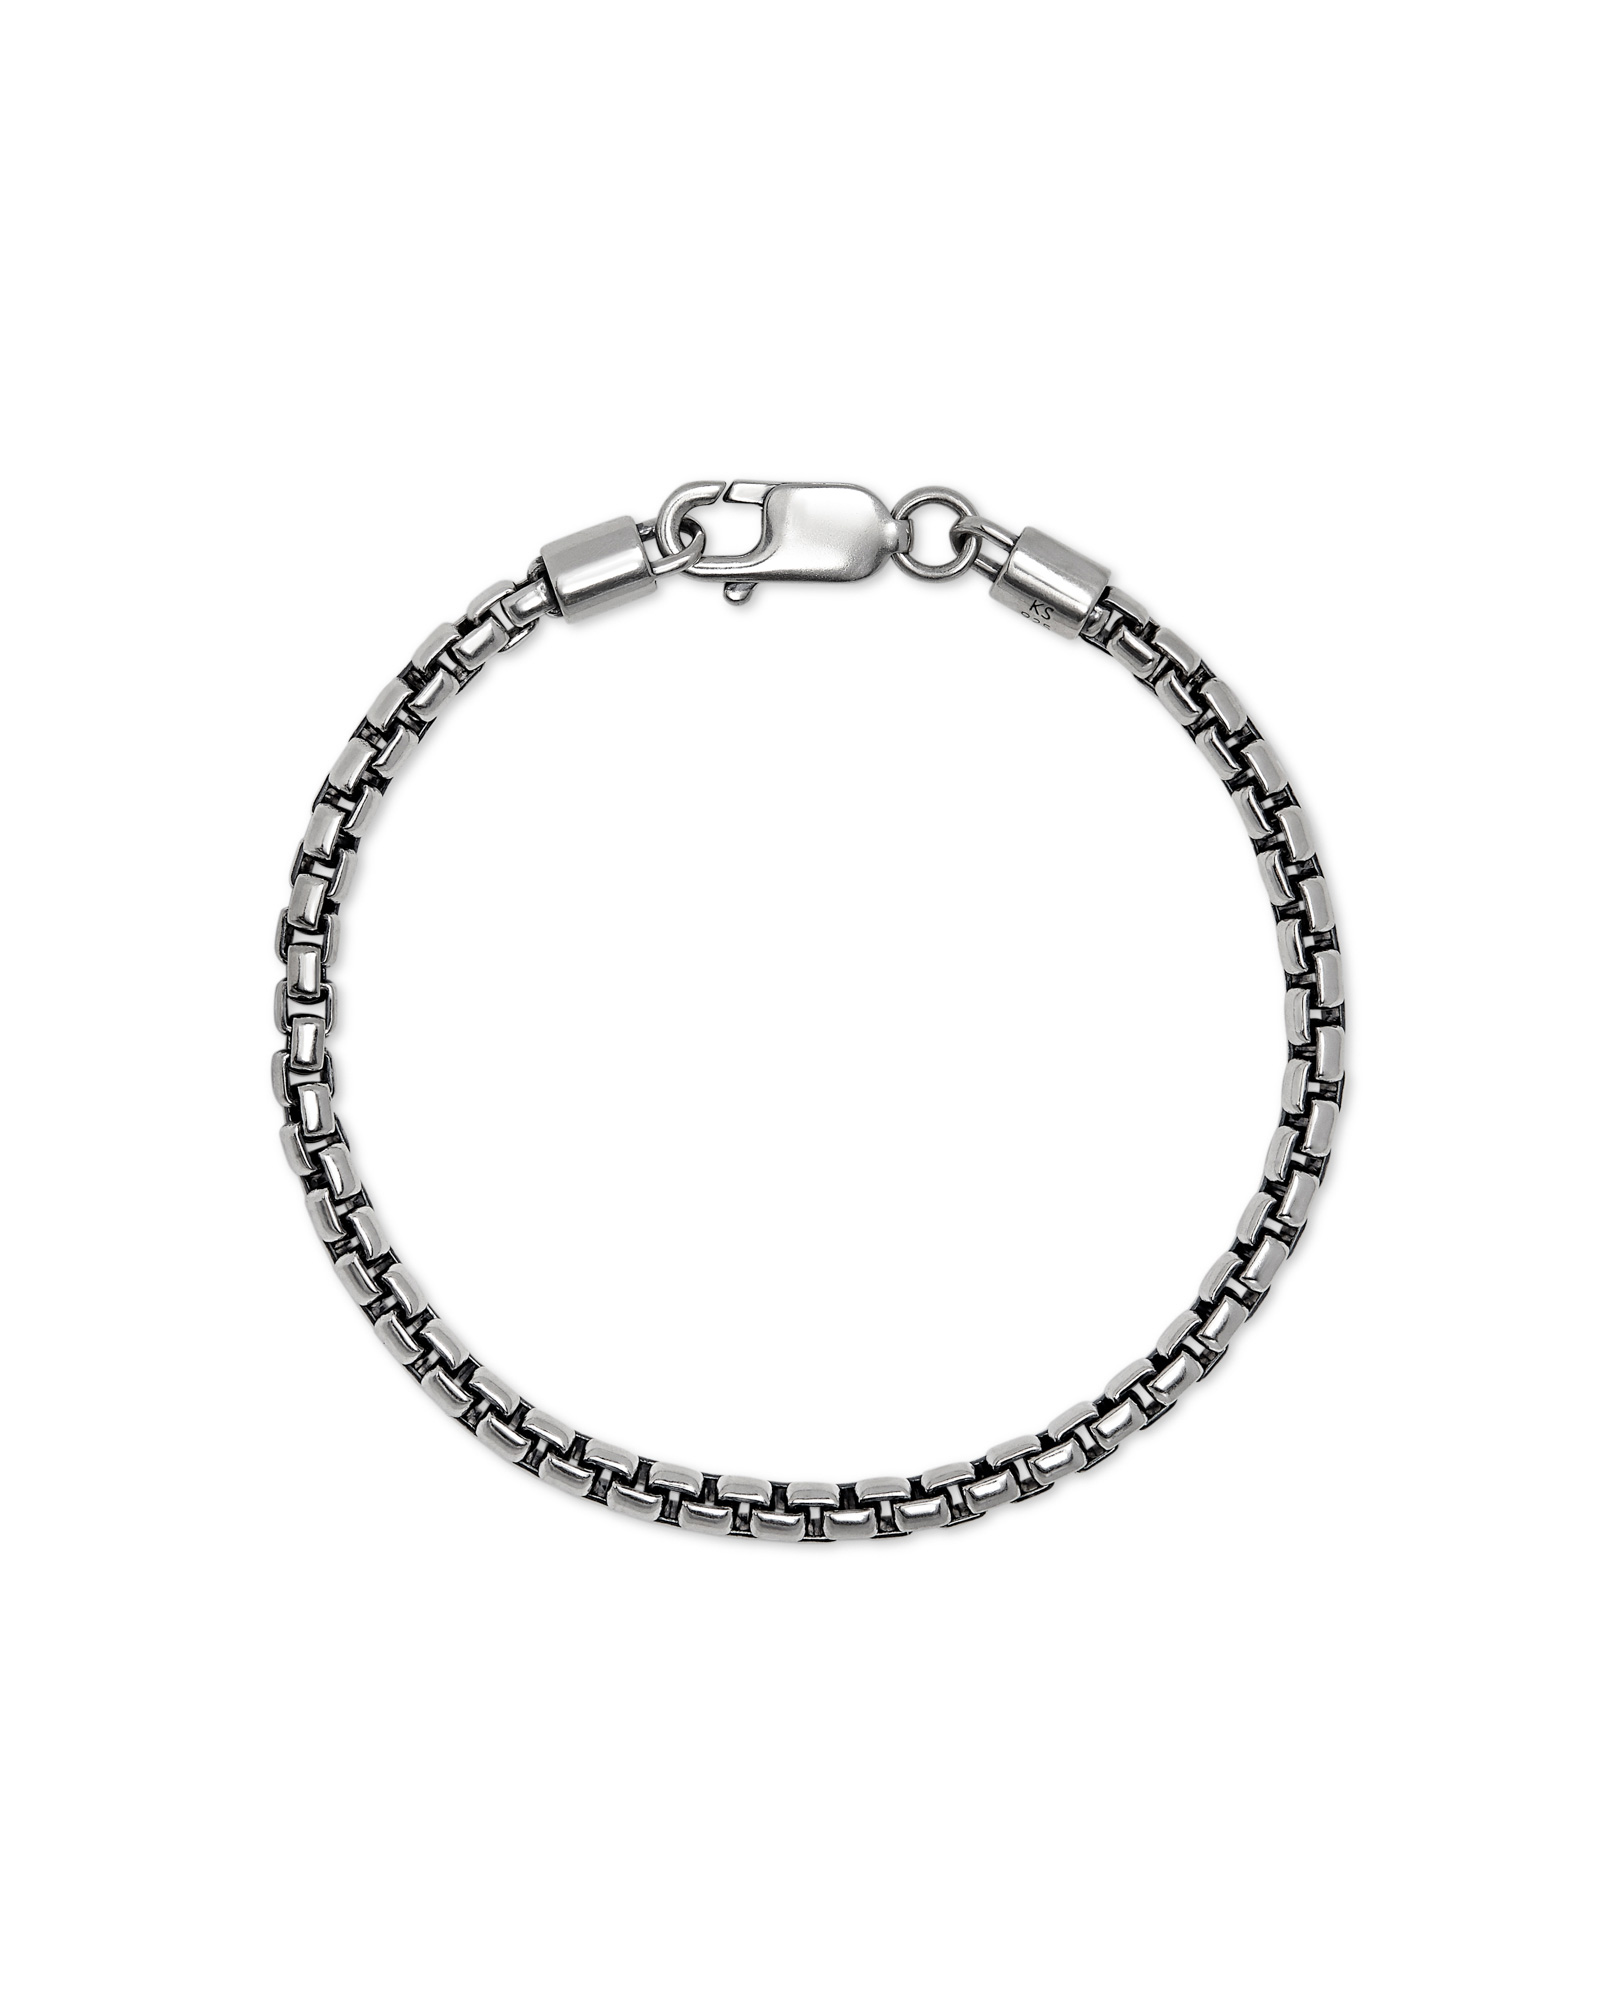 Beck Round Box Chain Bracelet in Oxidized Sterling Silver | Kendra